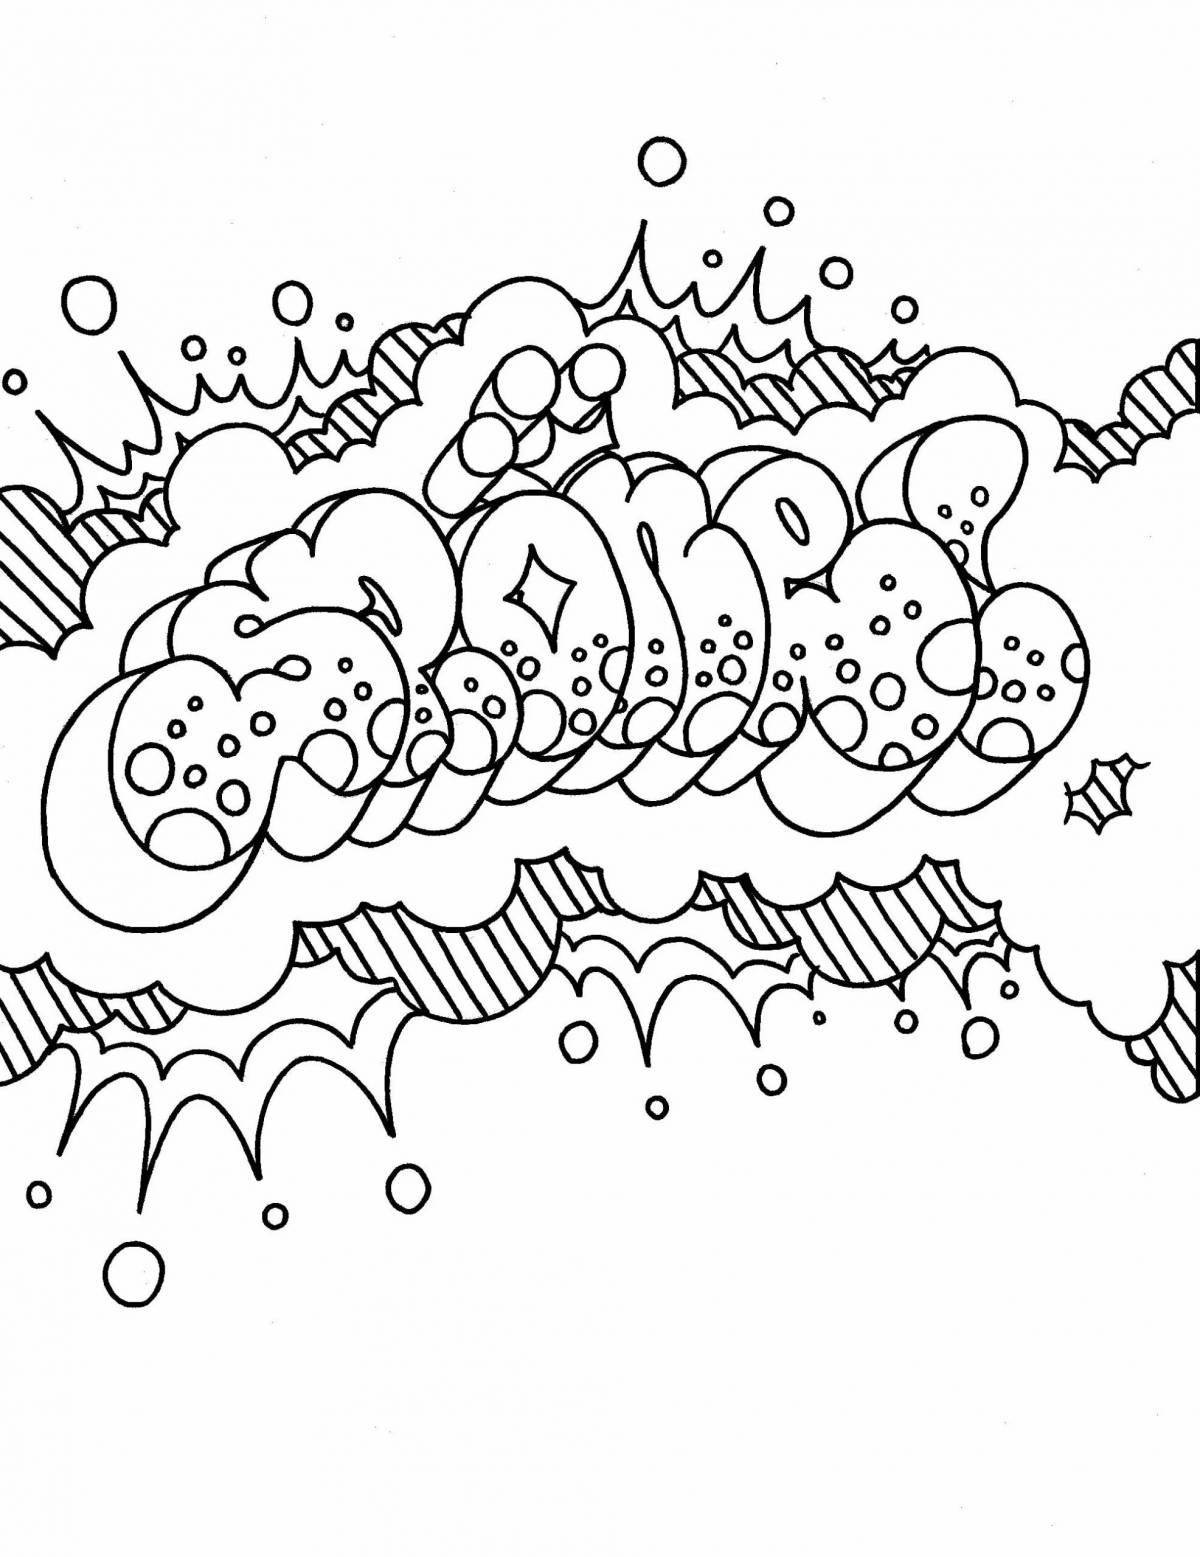 Graffiti coloring pages with color explosion for kids